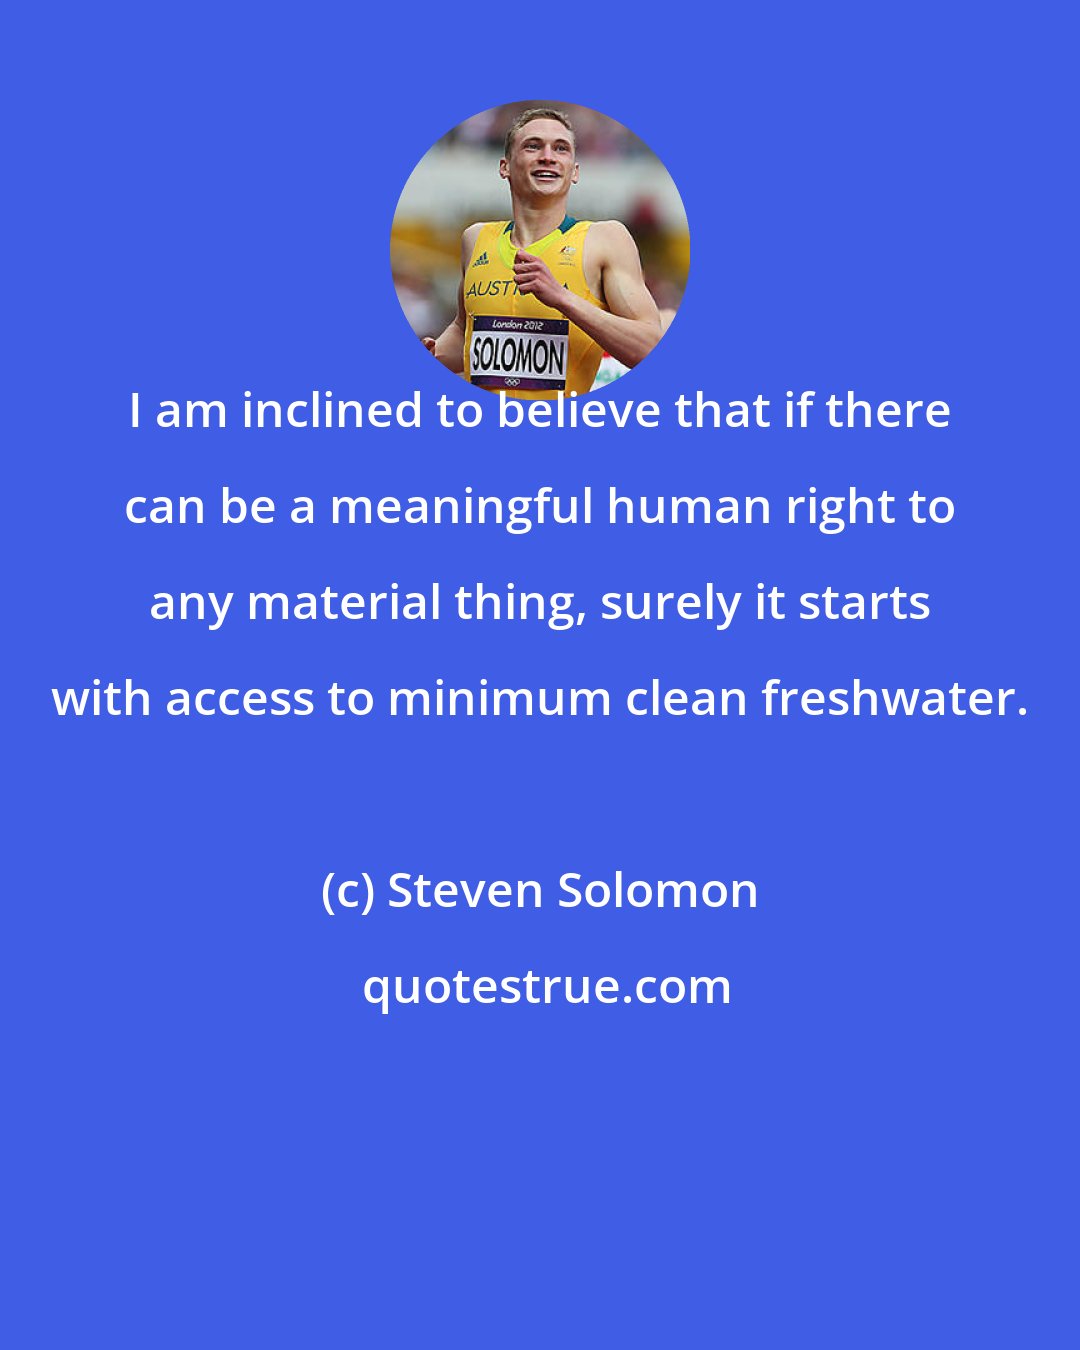 Steven Solomon: I am inclined to believe that if there can be a meaningful human right to any material thing, surely it starts with access to minimum clean freshwater.